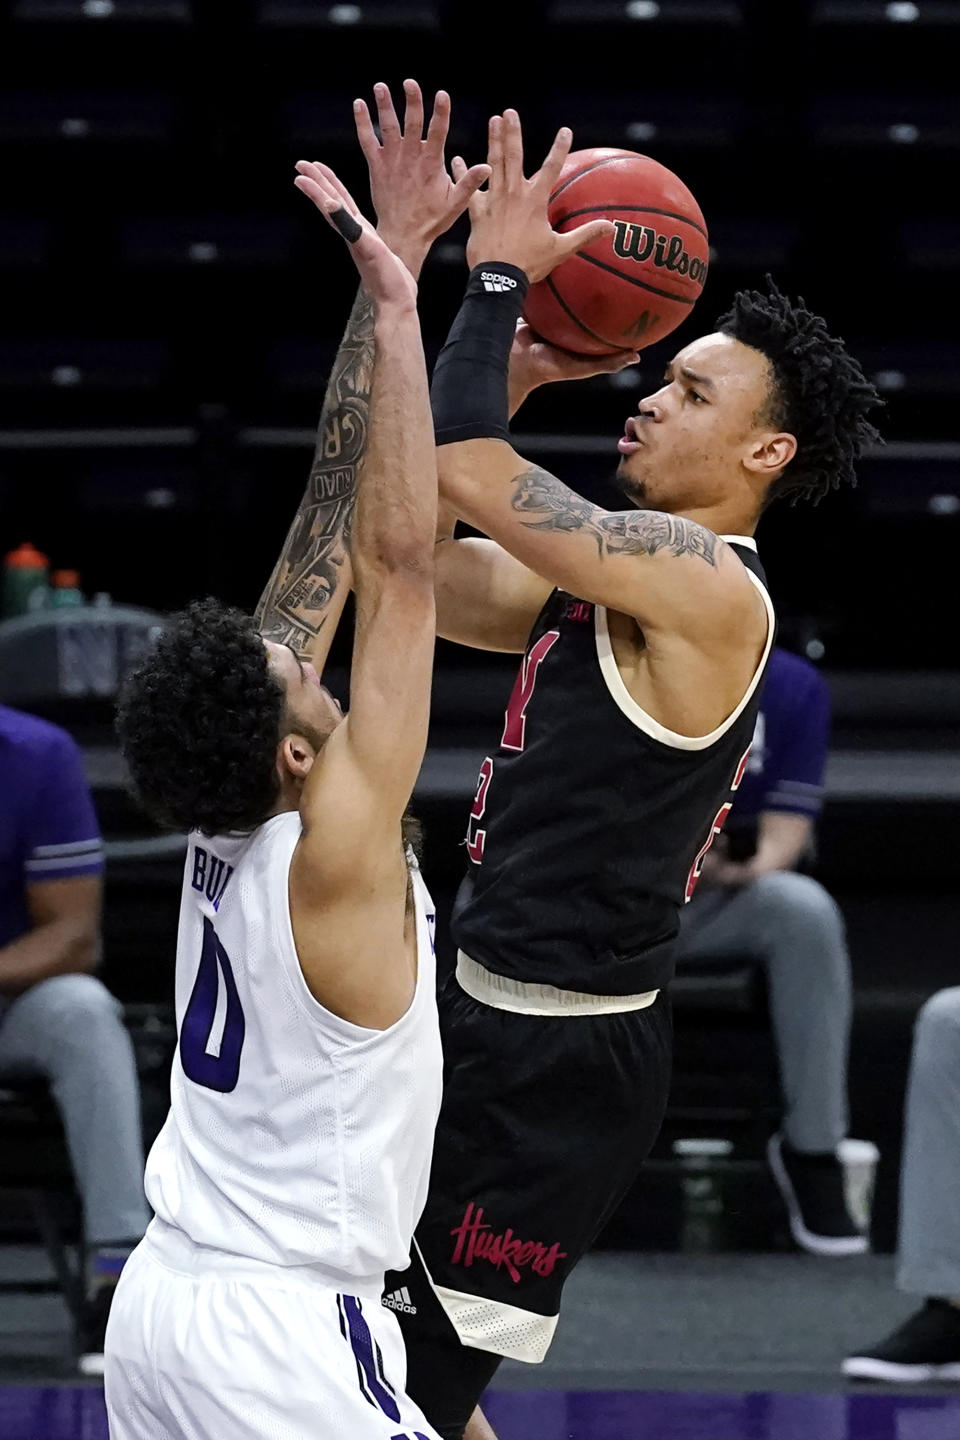 Nebraska guard Trey McGowens, right, shoots against Northwestern guard Boo Buie during the first half of an NCAA college basketball game in Evanston, Ill., Sunday, March 7, 2021. (AP Photo/Nam Y. Huh)